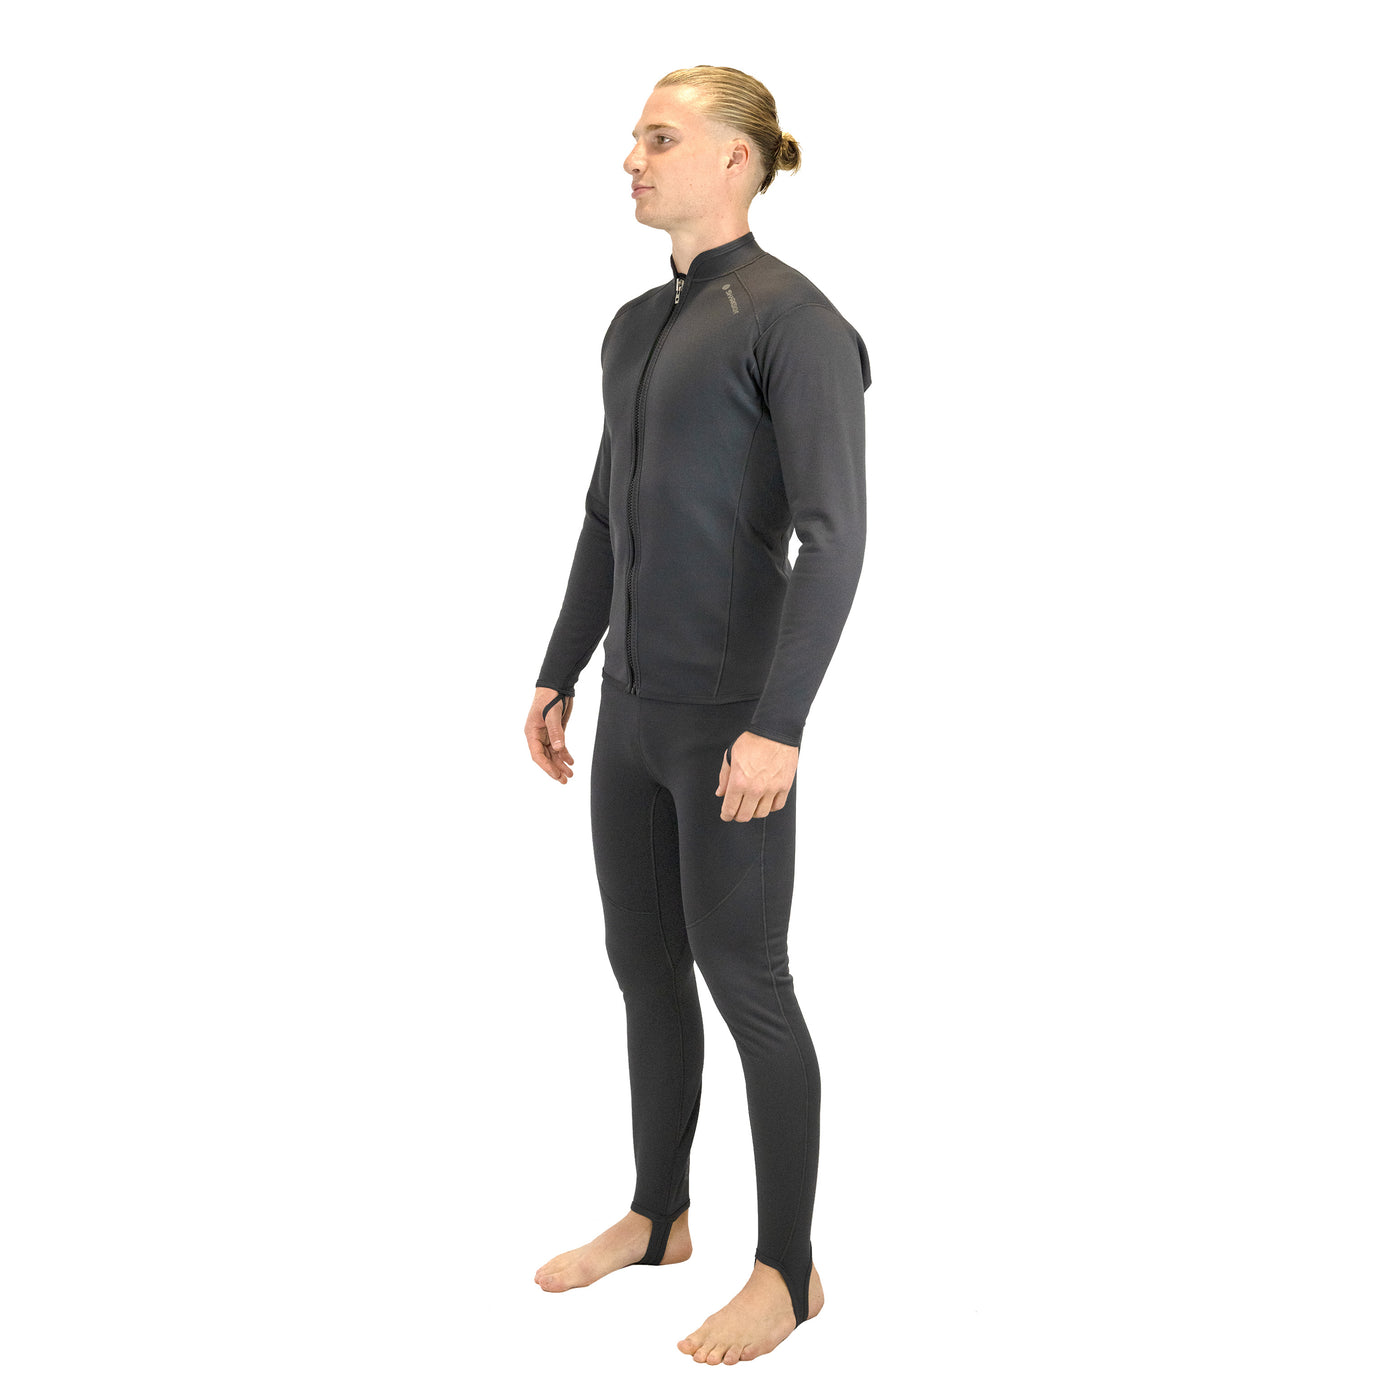 T2 CHILLPROOF TOP AND BOTTOMS PACKAGE - MENS